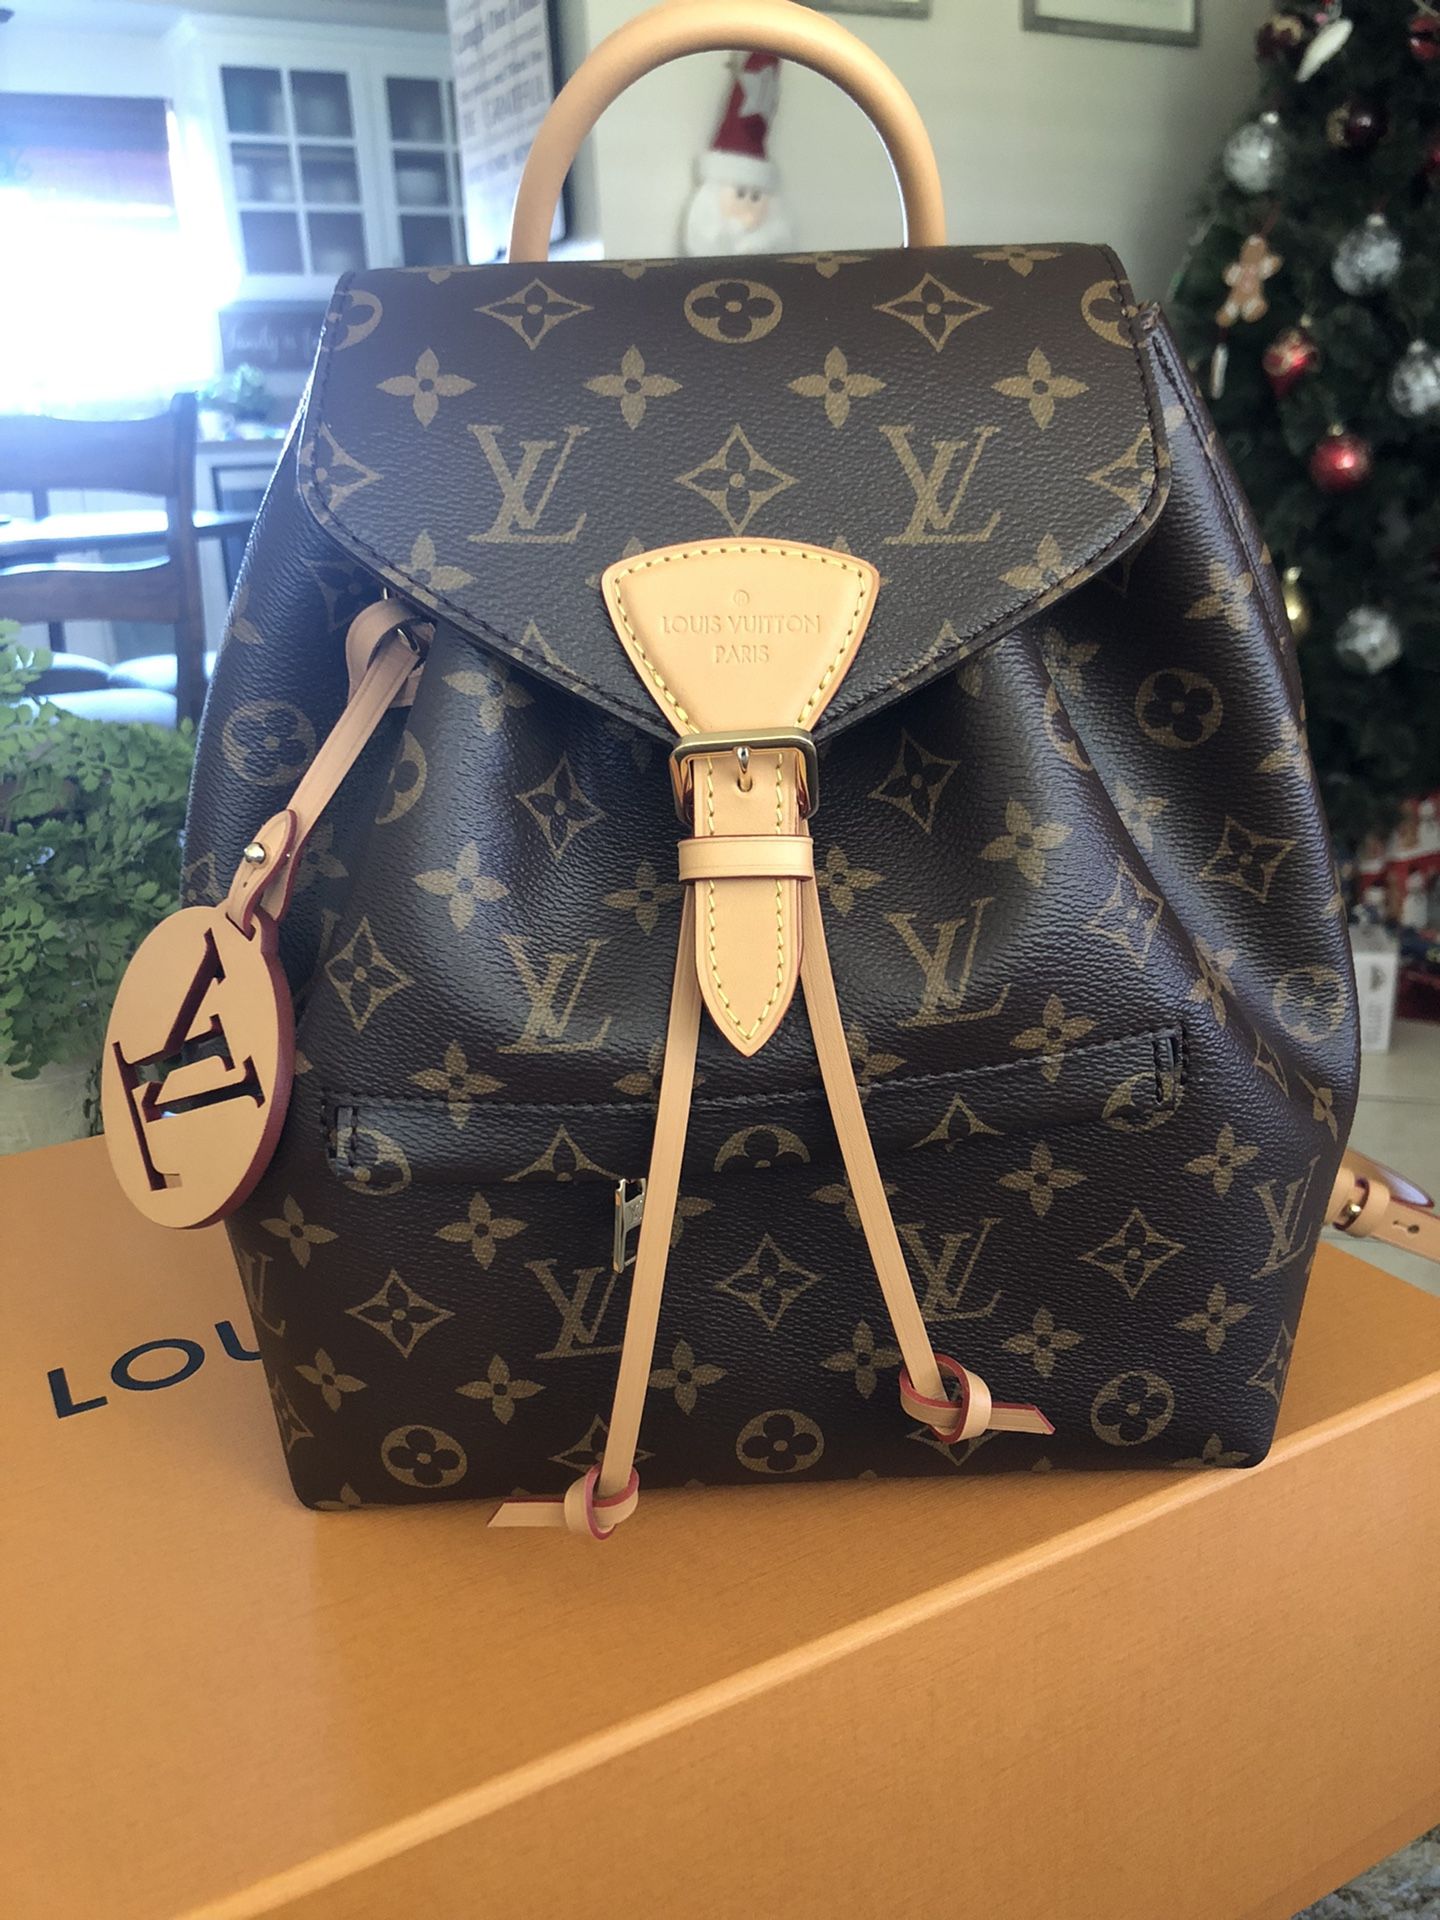 100% AUTHENTIC Louis Vuitton SOLD OUT EVERYWHERE for